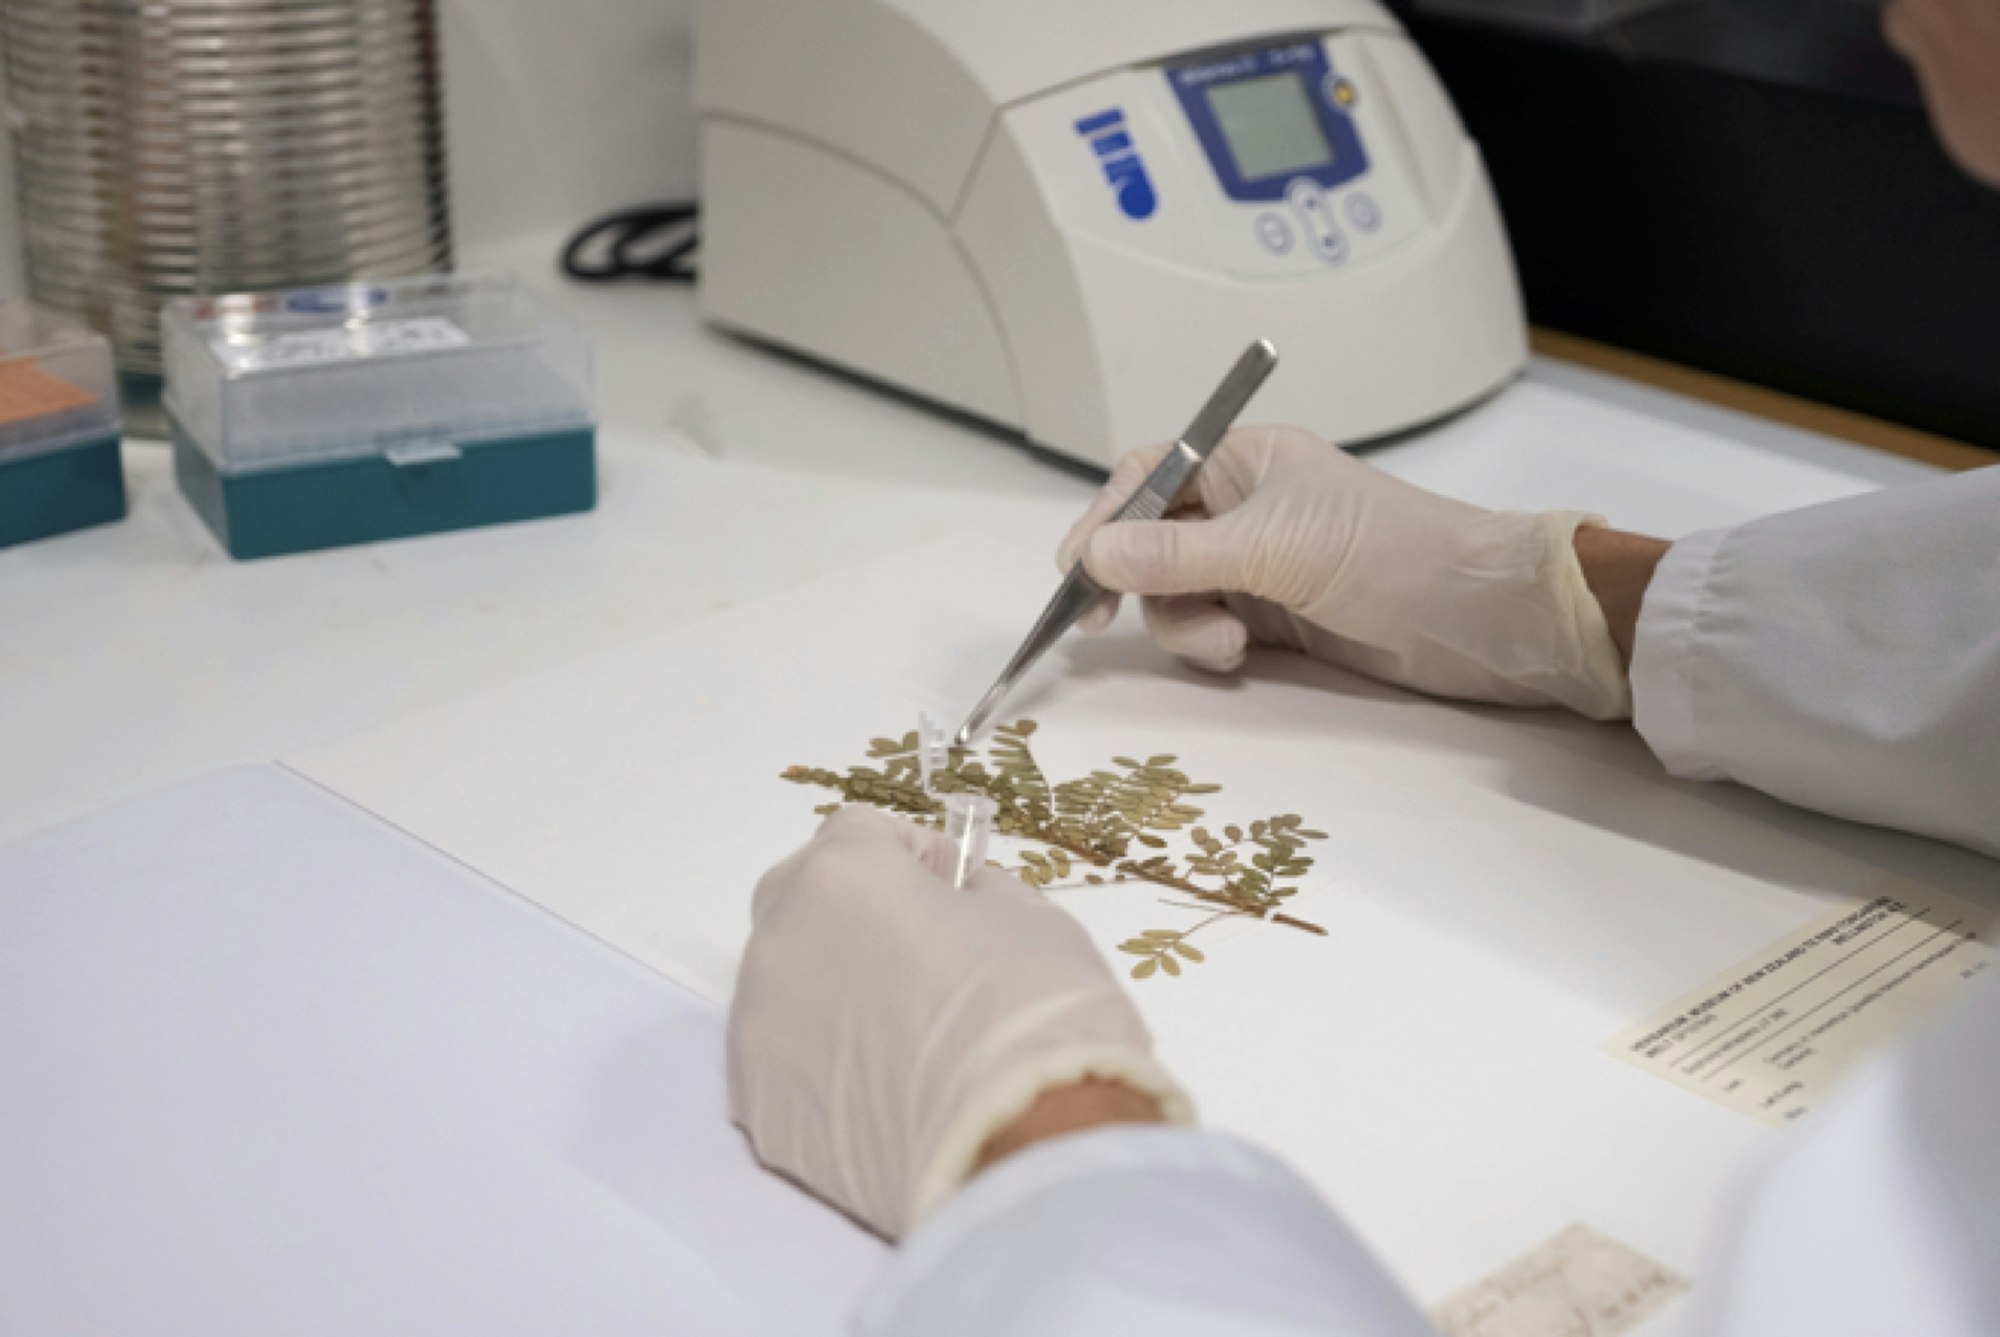 A scientist wearing blue gloves creating a page with a plant specimen on it